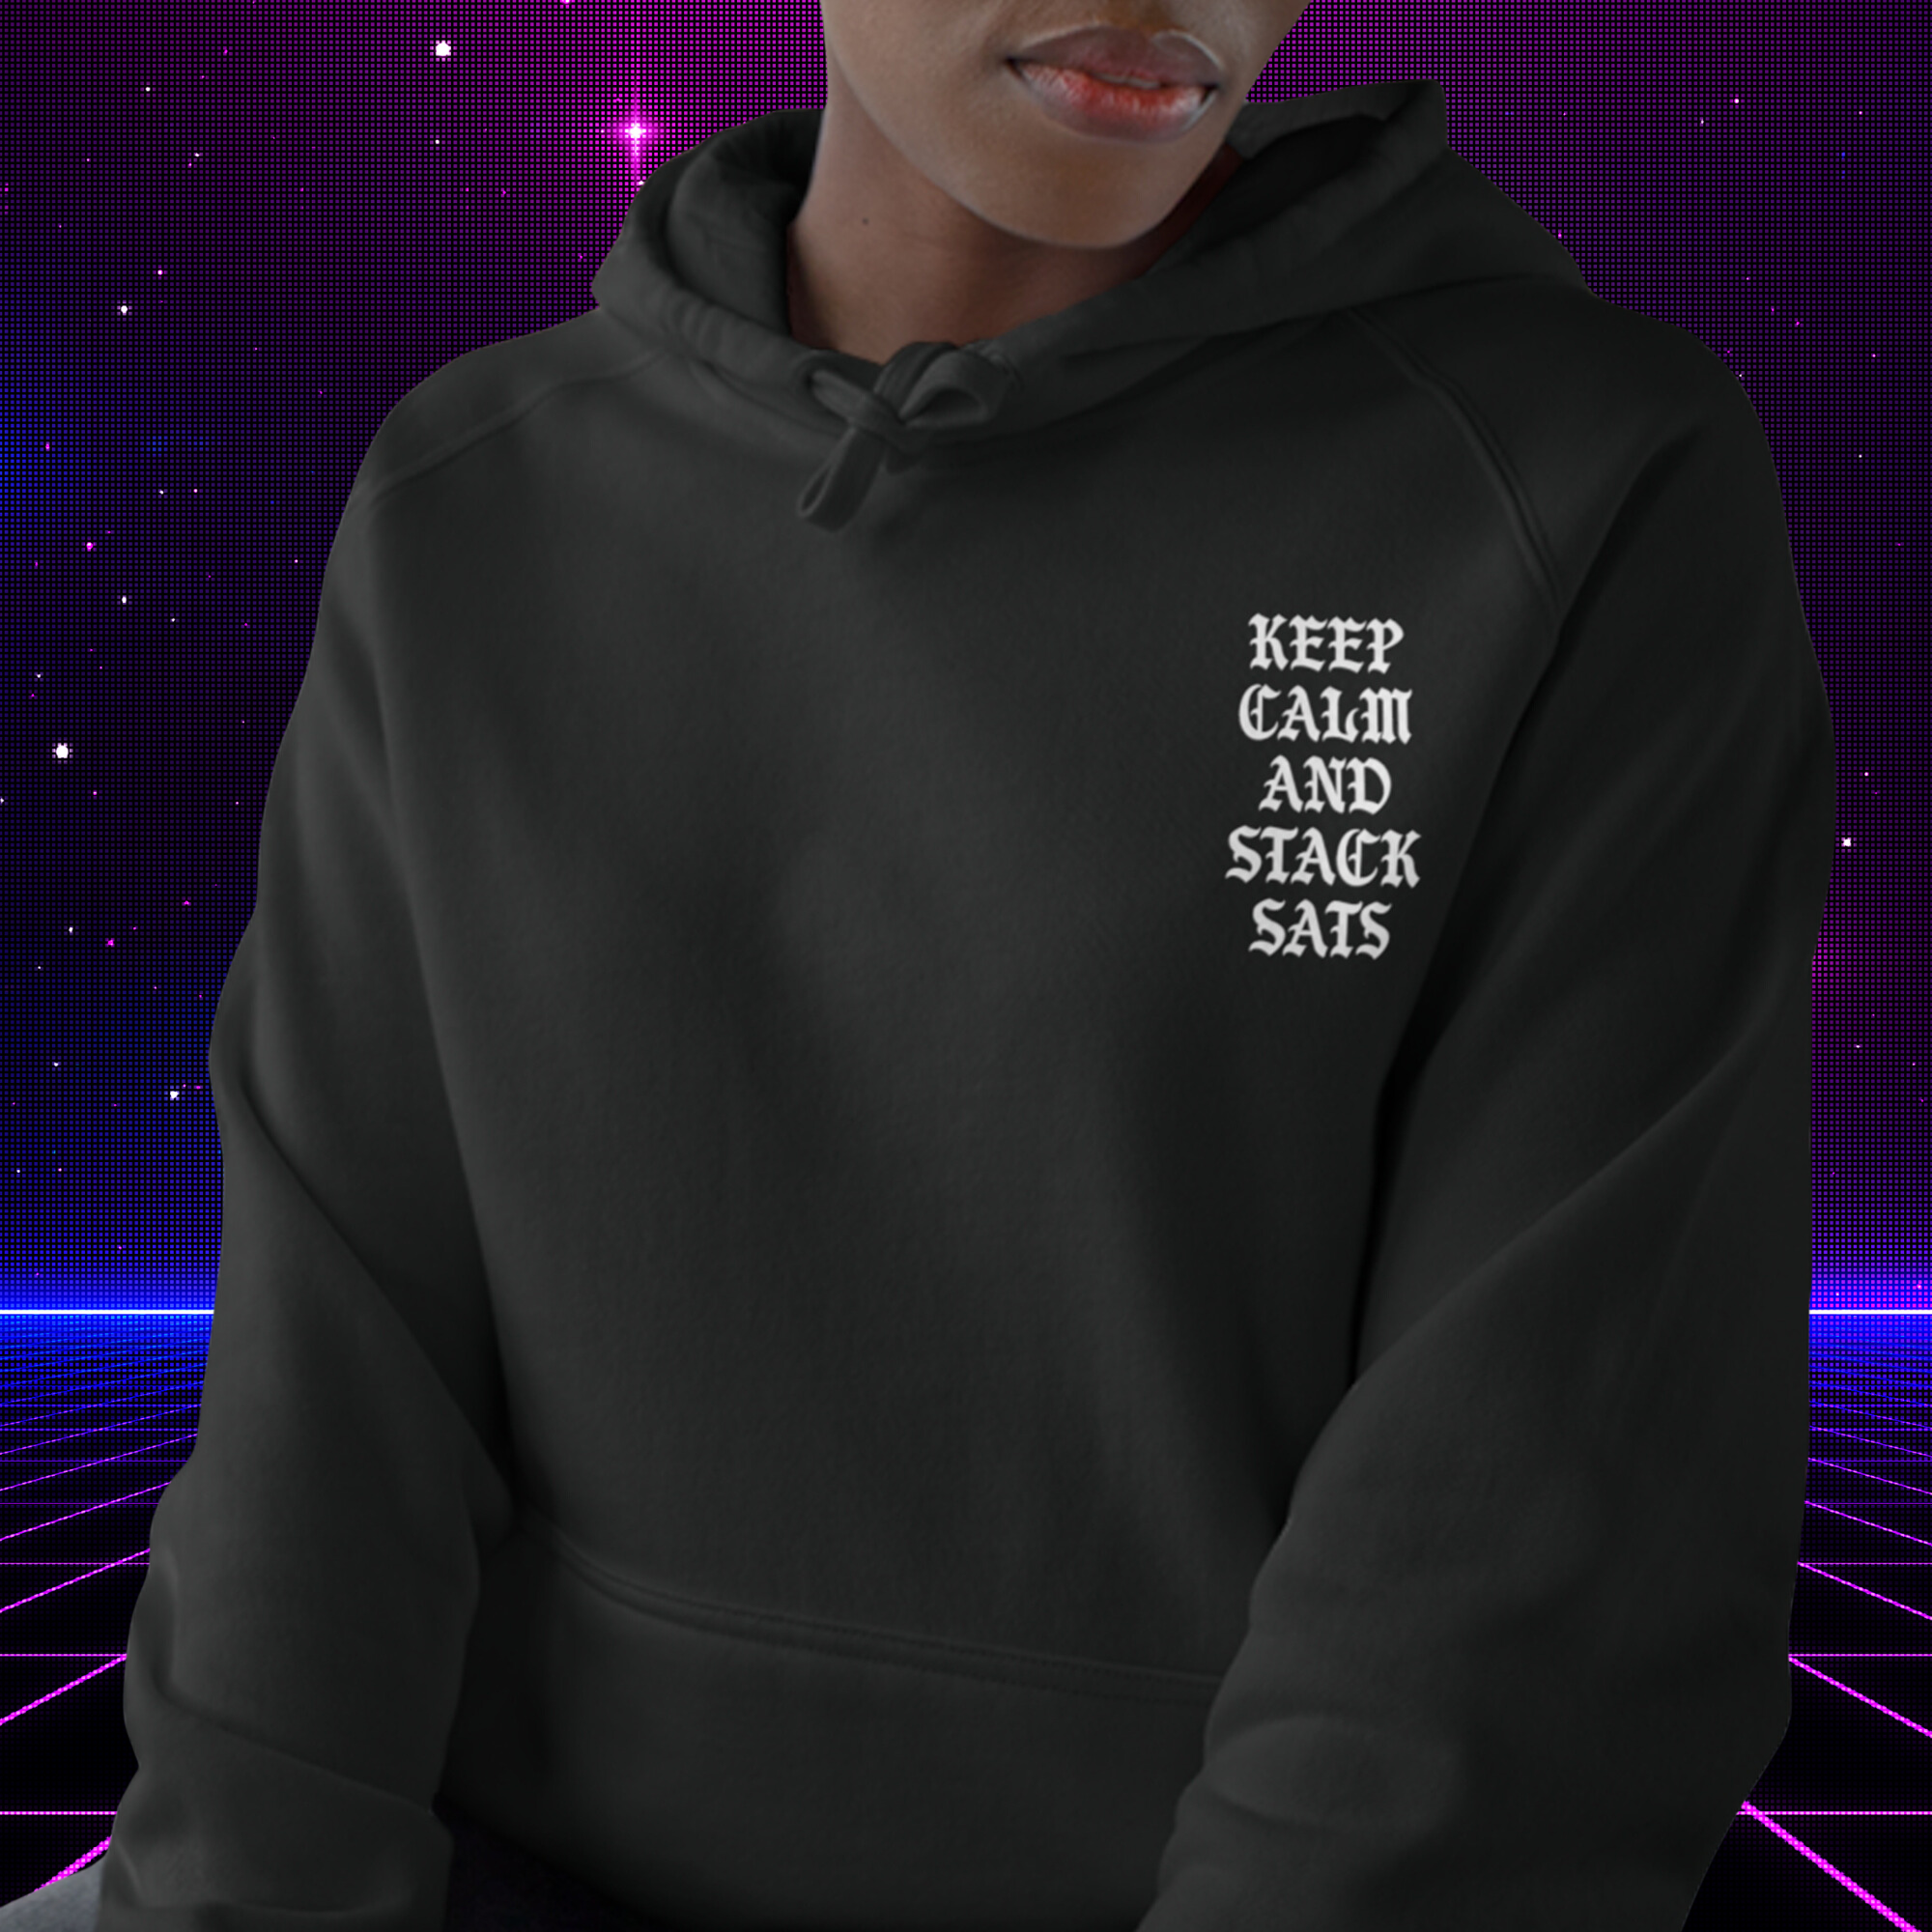 Bitcoin Merch - Keep Calm And Stack Sats Hoodie. Female model image (front view).